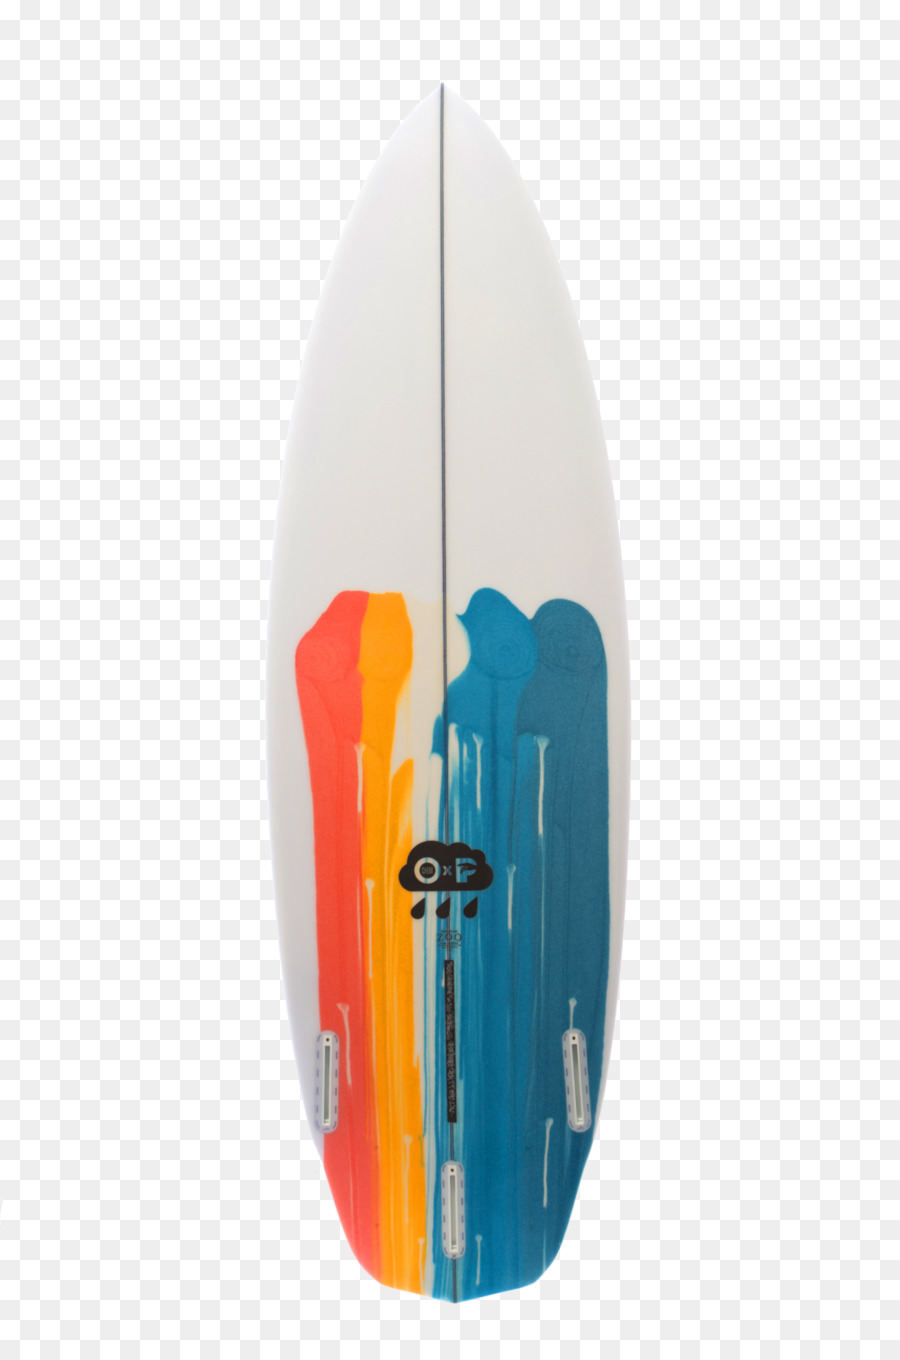 Surfboard - hand-painted model png download - 1000*1500 - Free Transparent Surfboard png Download.